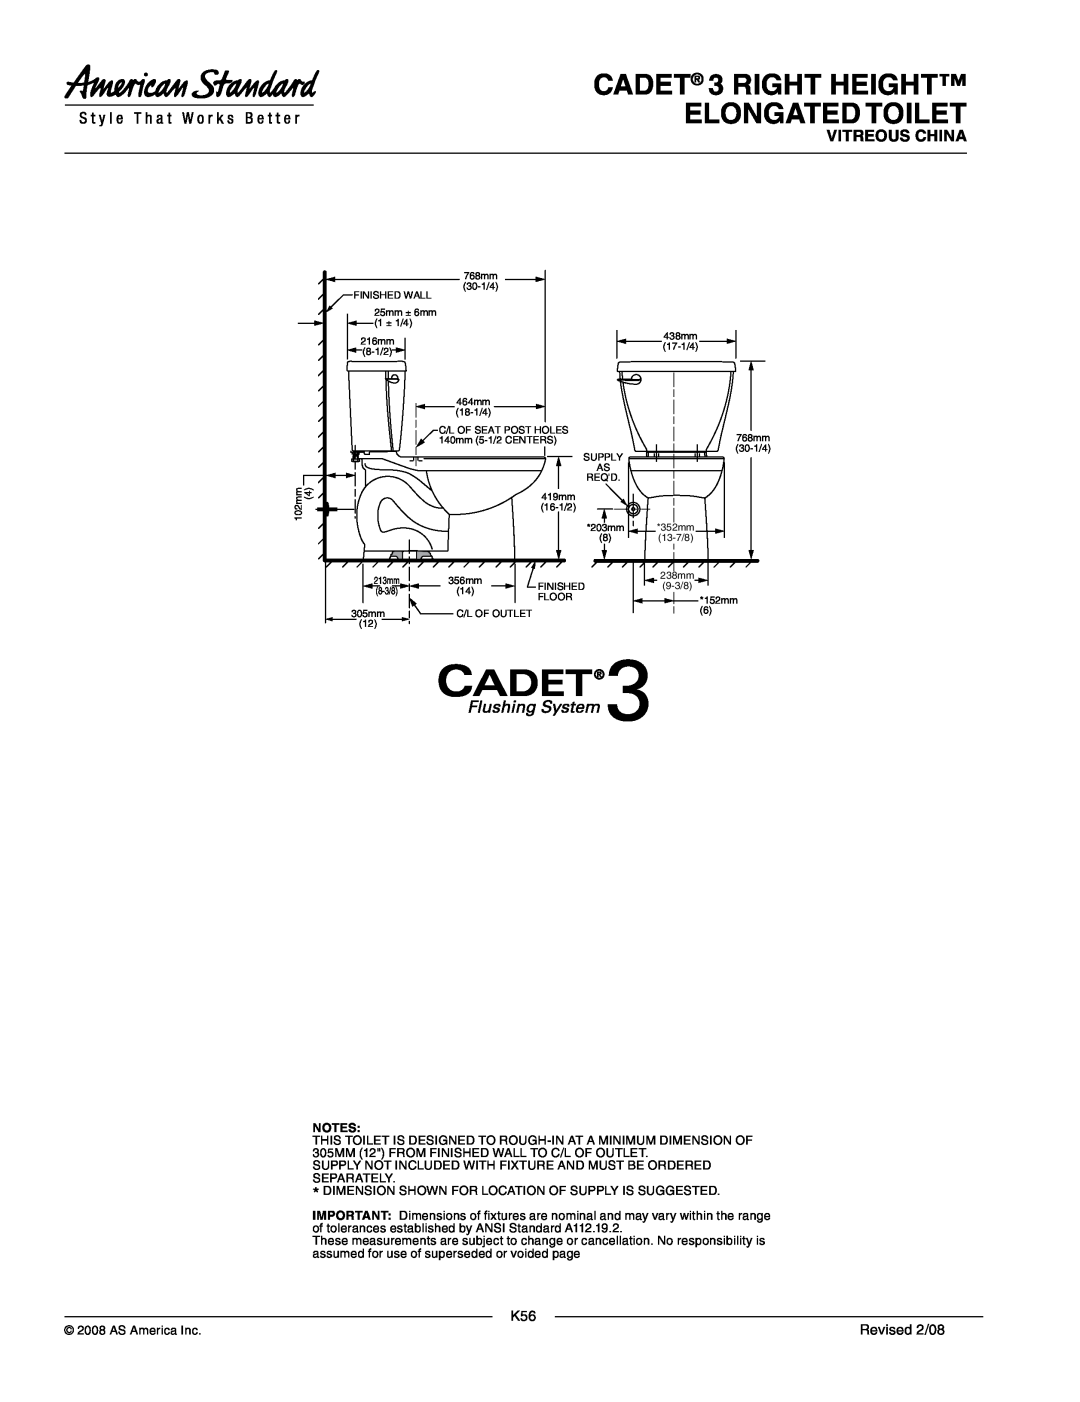 American Standard 2386.012, 4021.500, 4021.600, 3016.016 CADET 3 RIGHT HEIGHT ELONGATED TOILET, Vitreous China, Revised 2/08 